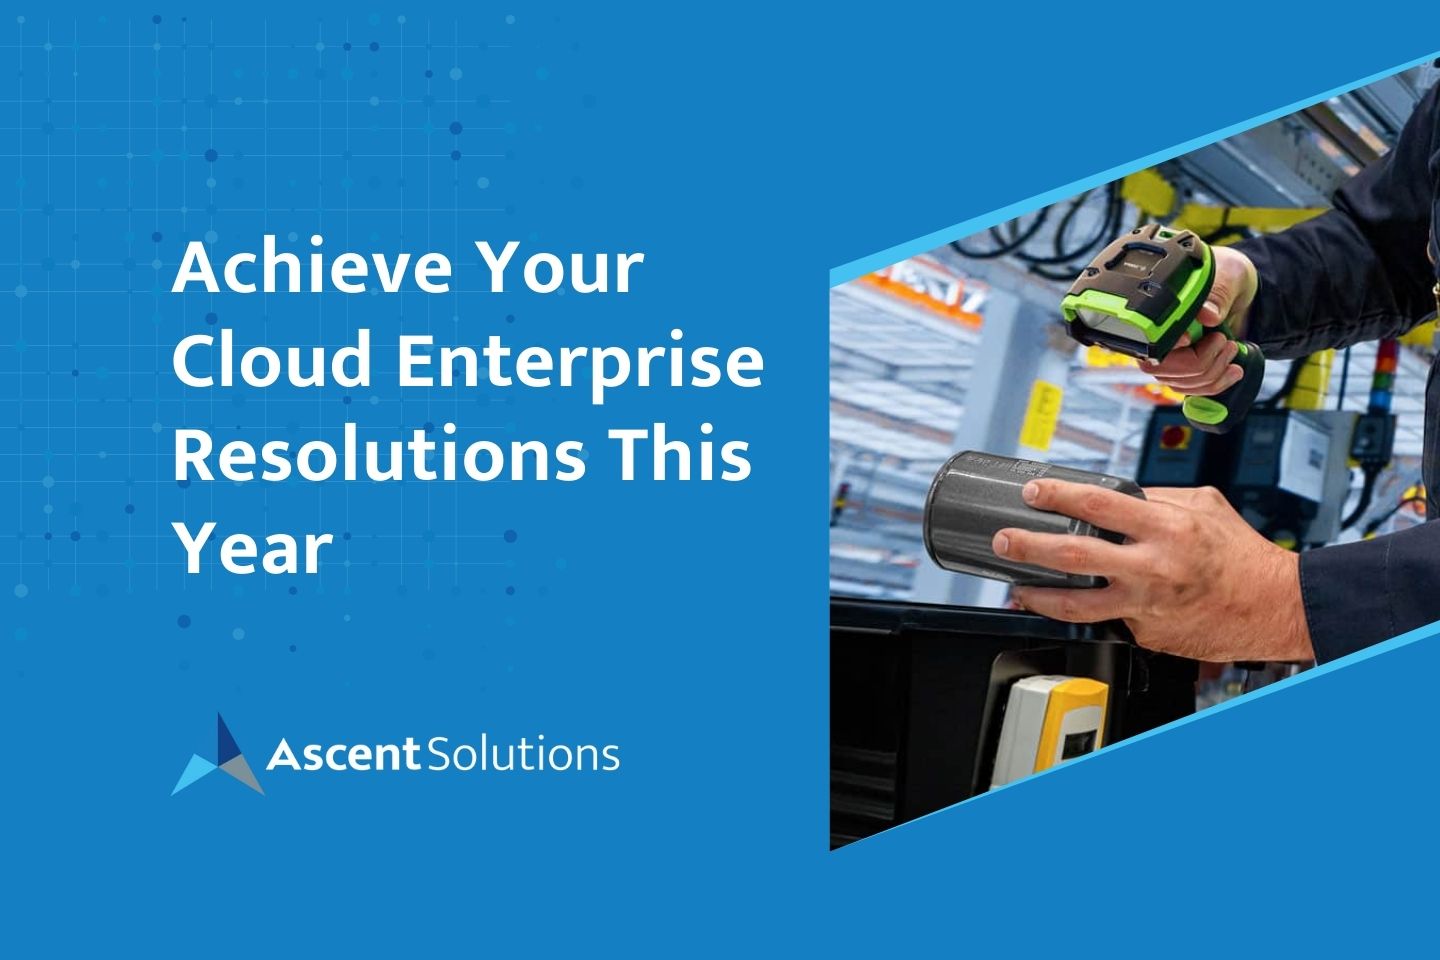 Achieve Your Cloud Enterprise Resolutions This Year